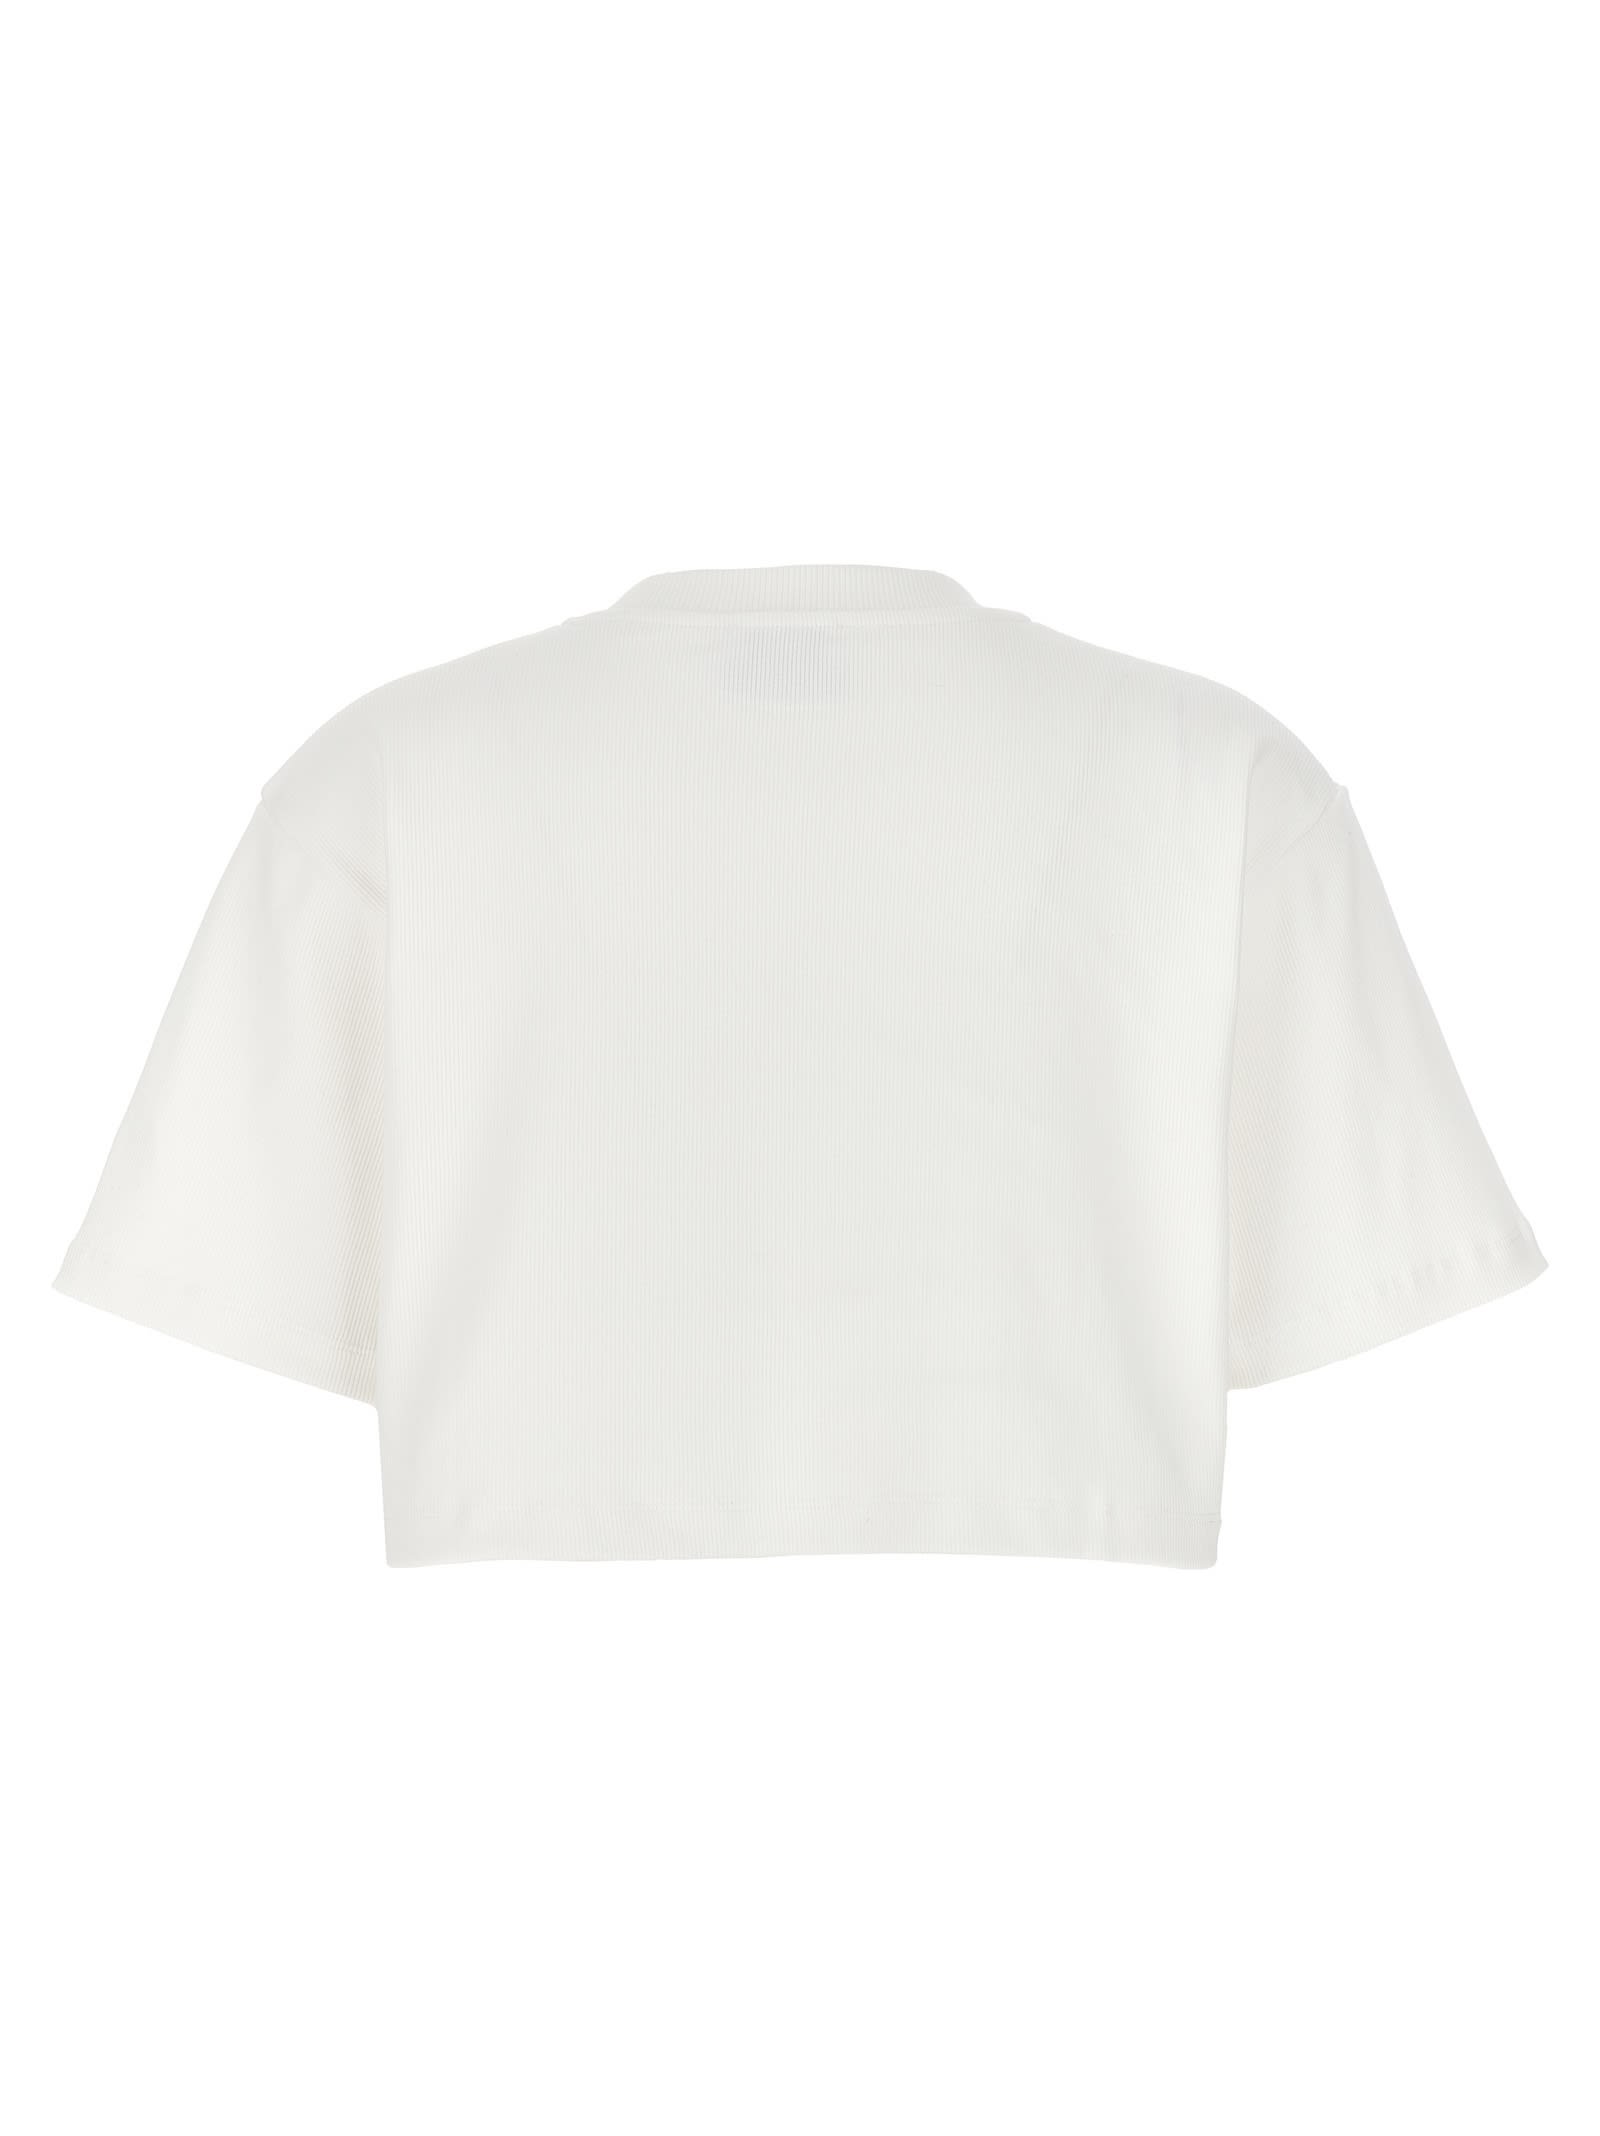 Shop Off-white Off Stamp T-shirt In White